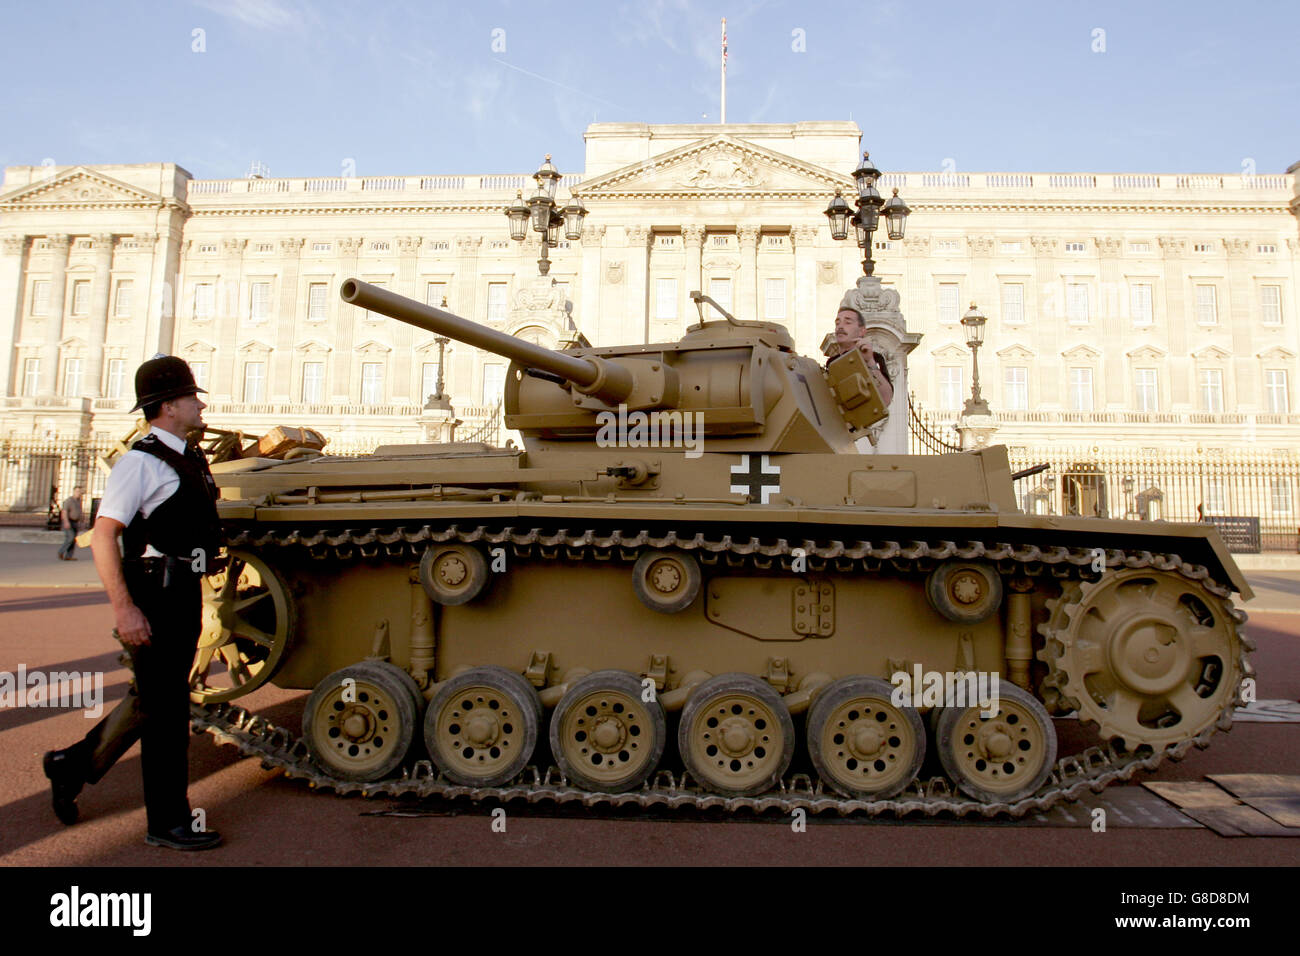 A police officer takes a look at a German Panzer III tank parked outside Buckingham Palace in London. The tank was on its way to St James's Park where it will be on display as part of the Living Museum - an exhibition which is part of the commemoration of the 60th anniversary of the end of the Second World War. Stock Photo